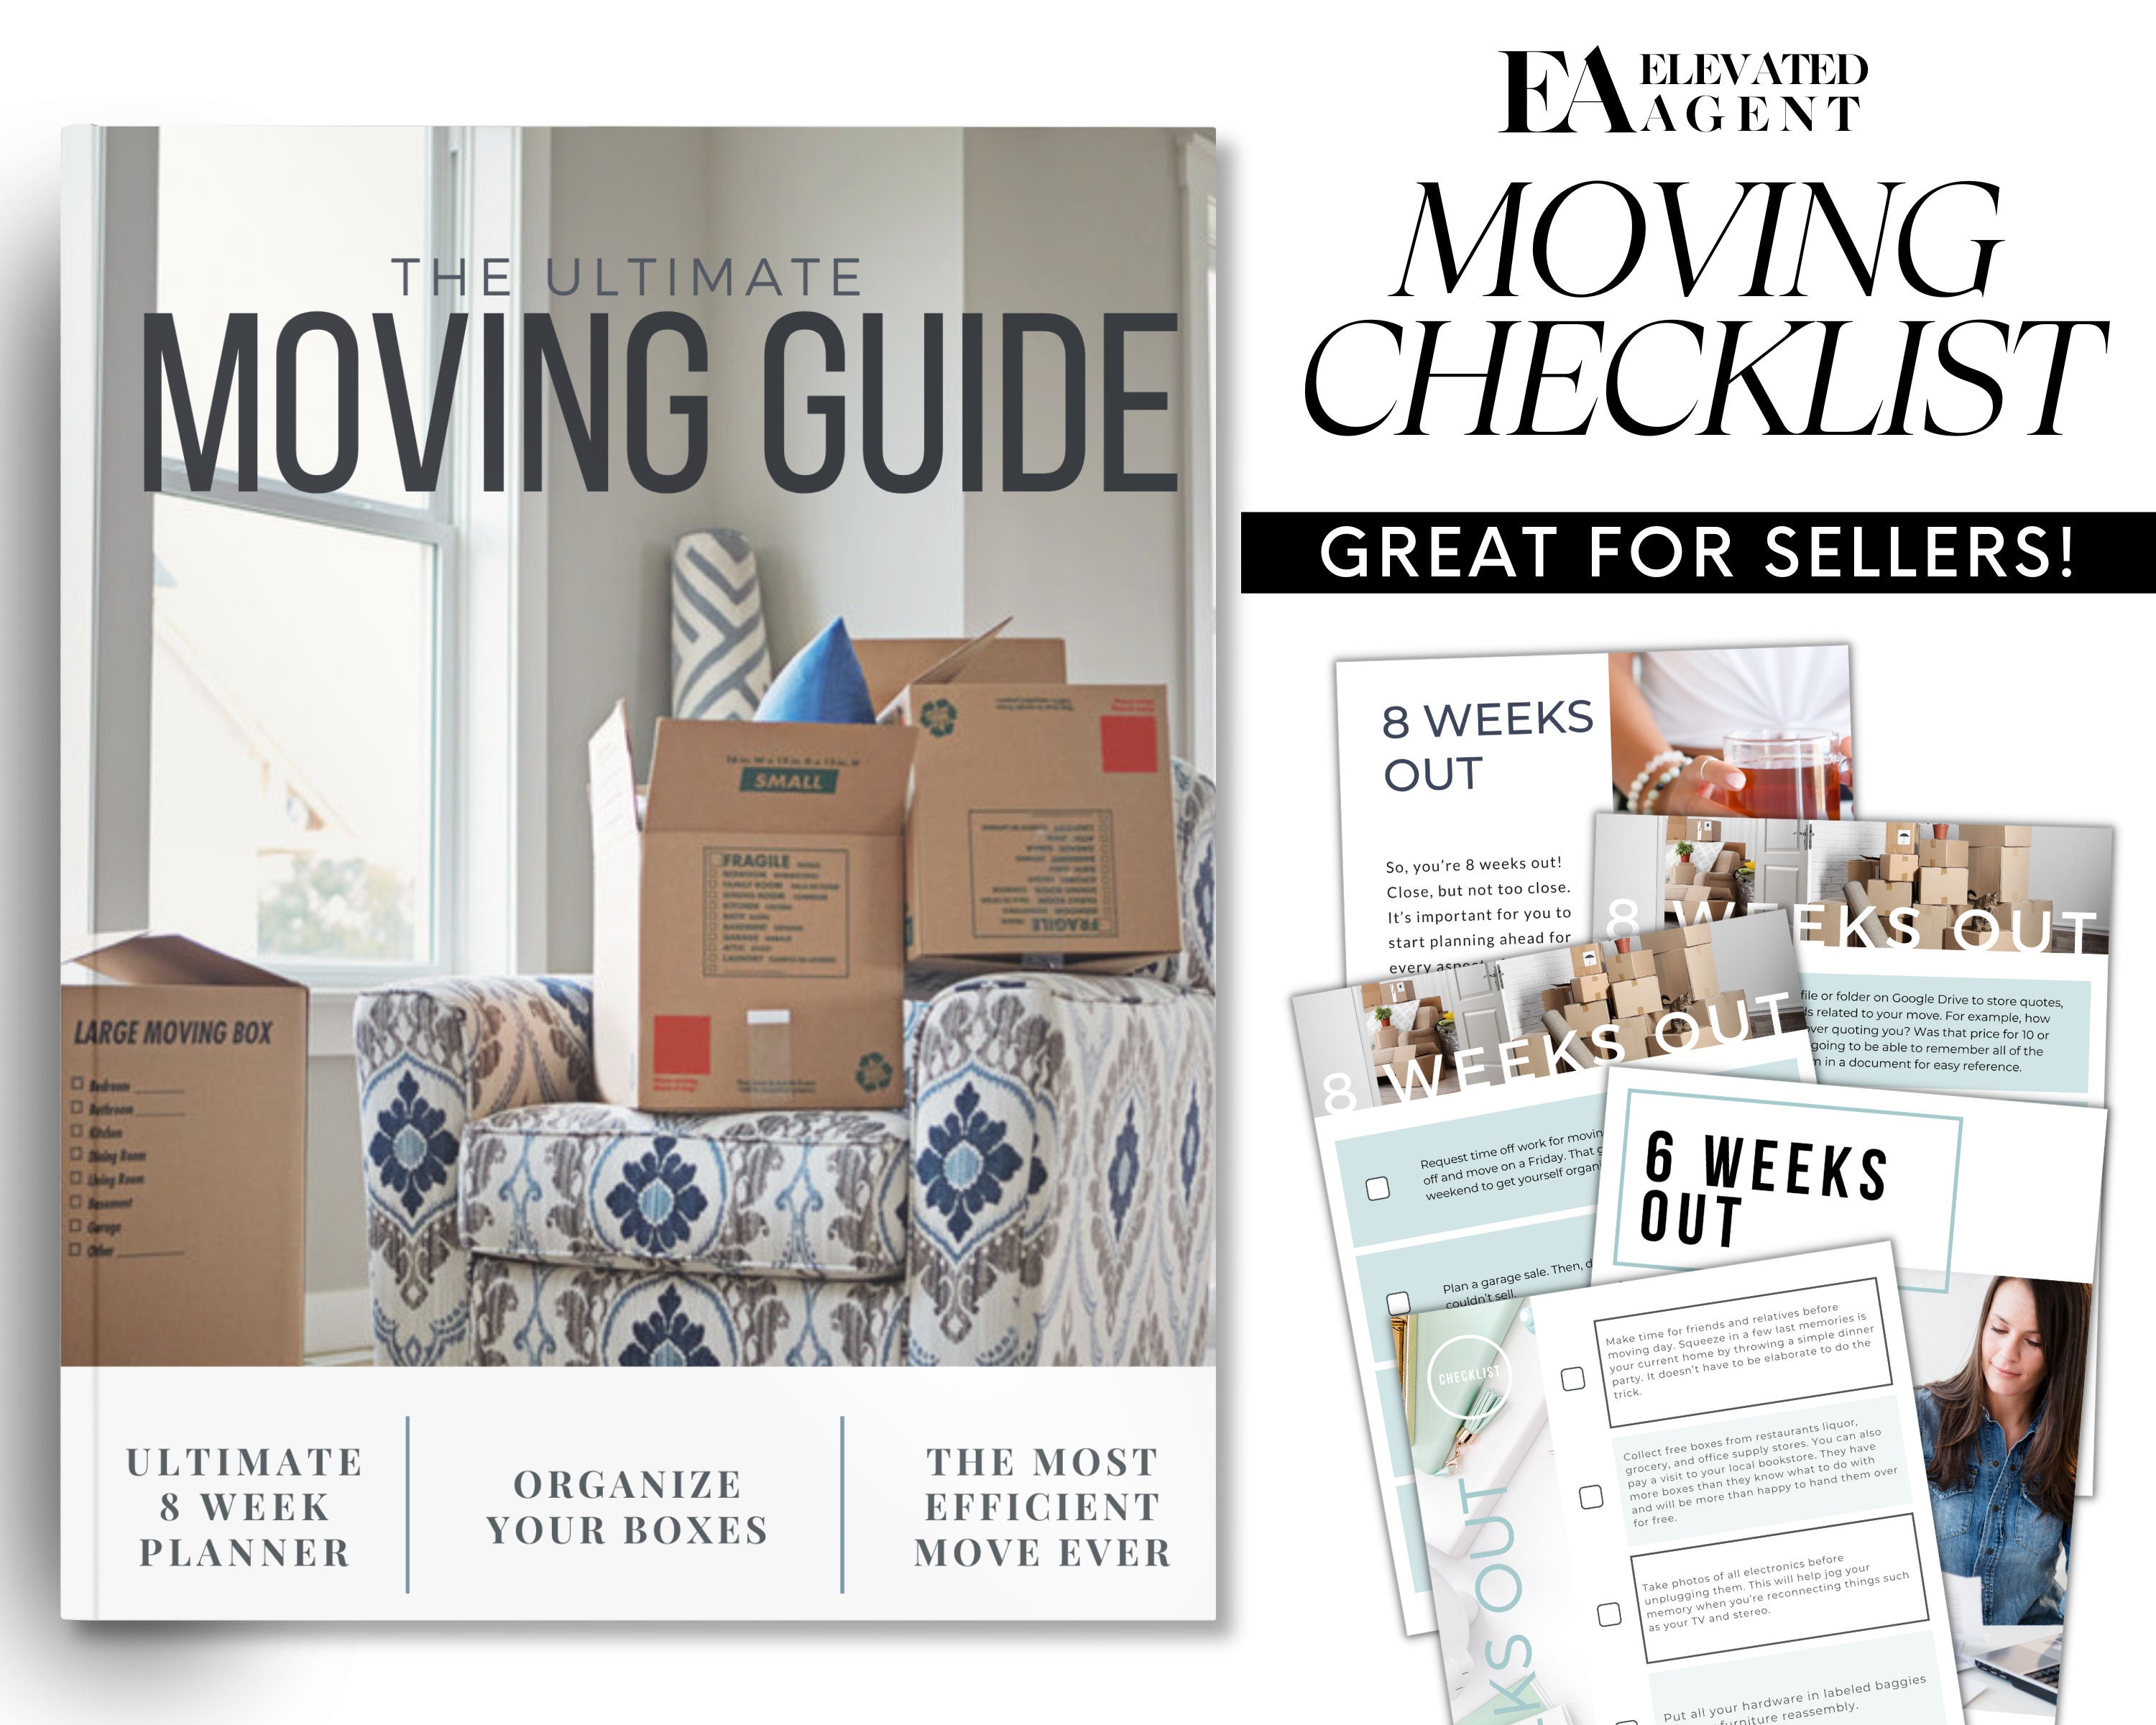 New home checklist: The ultimate guide to moving in